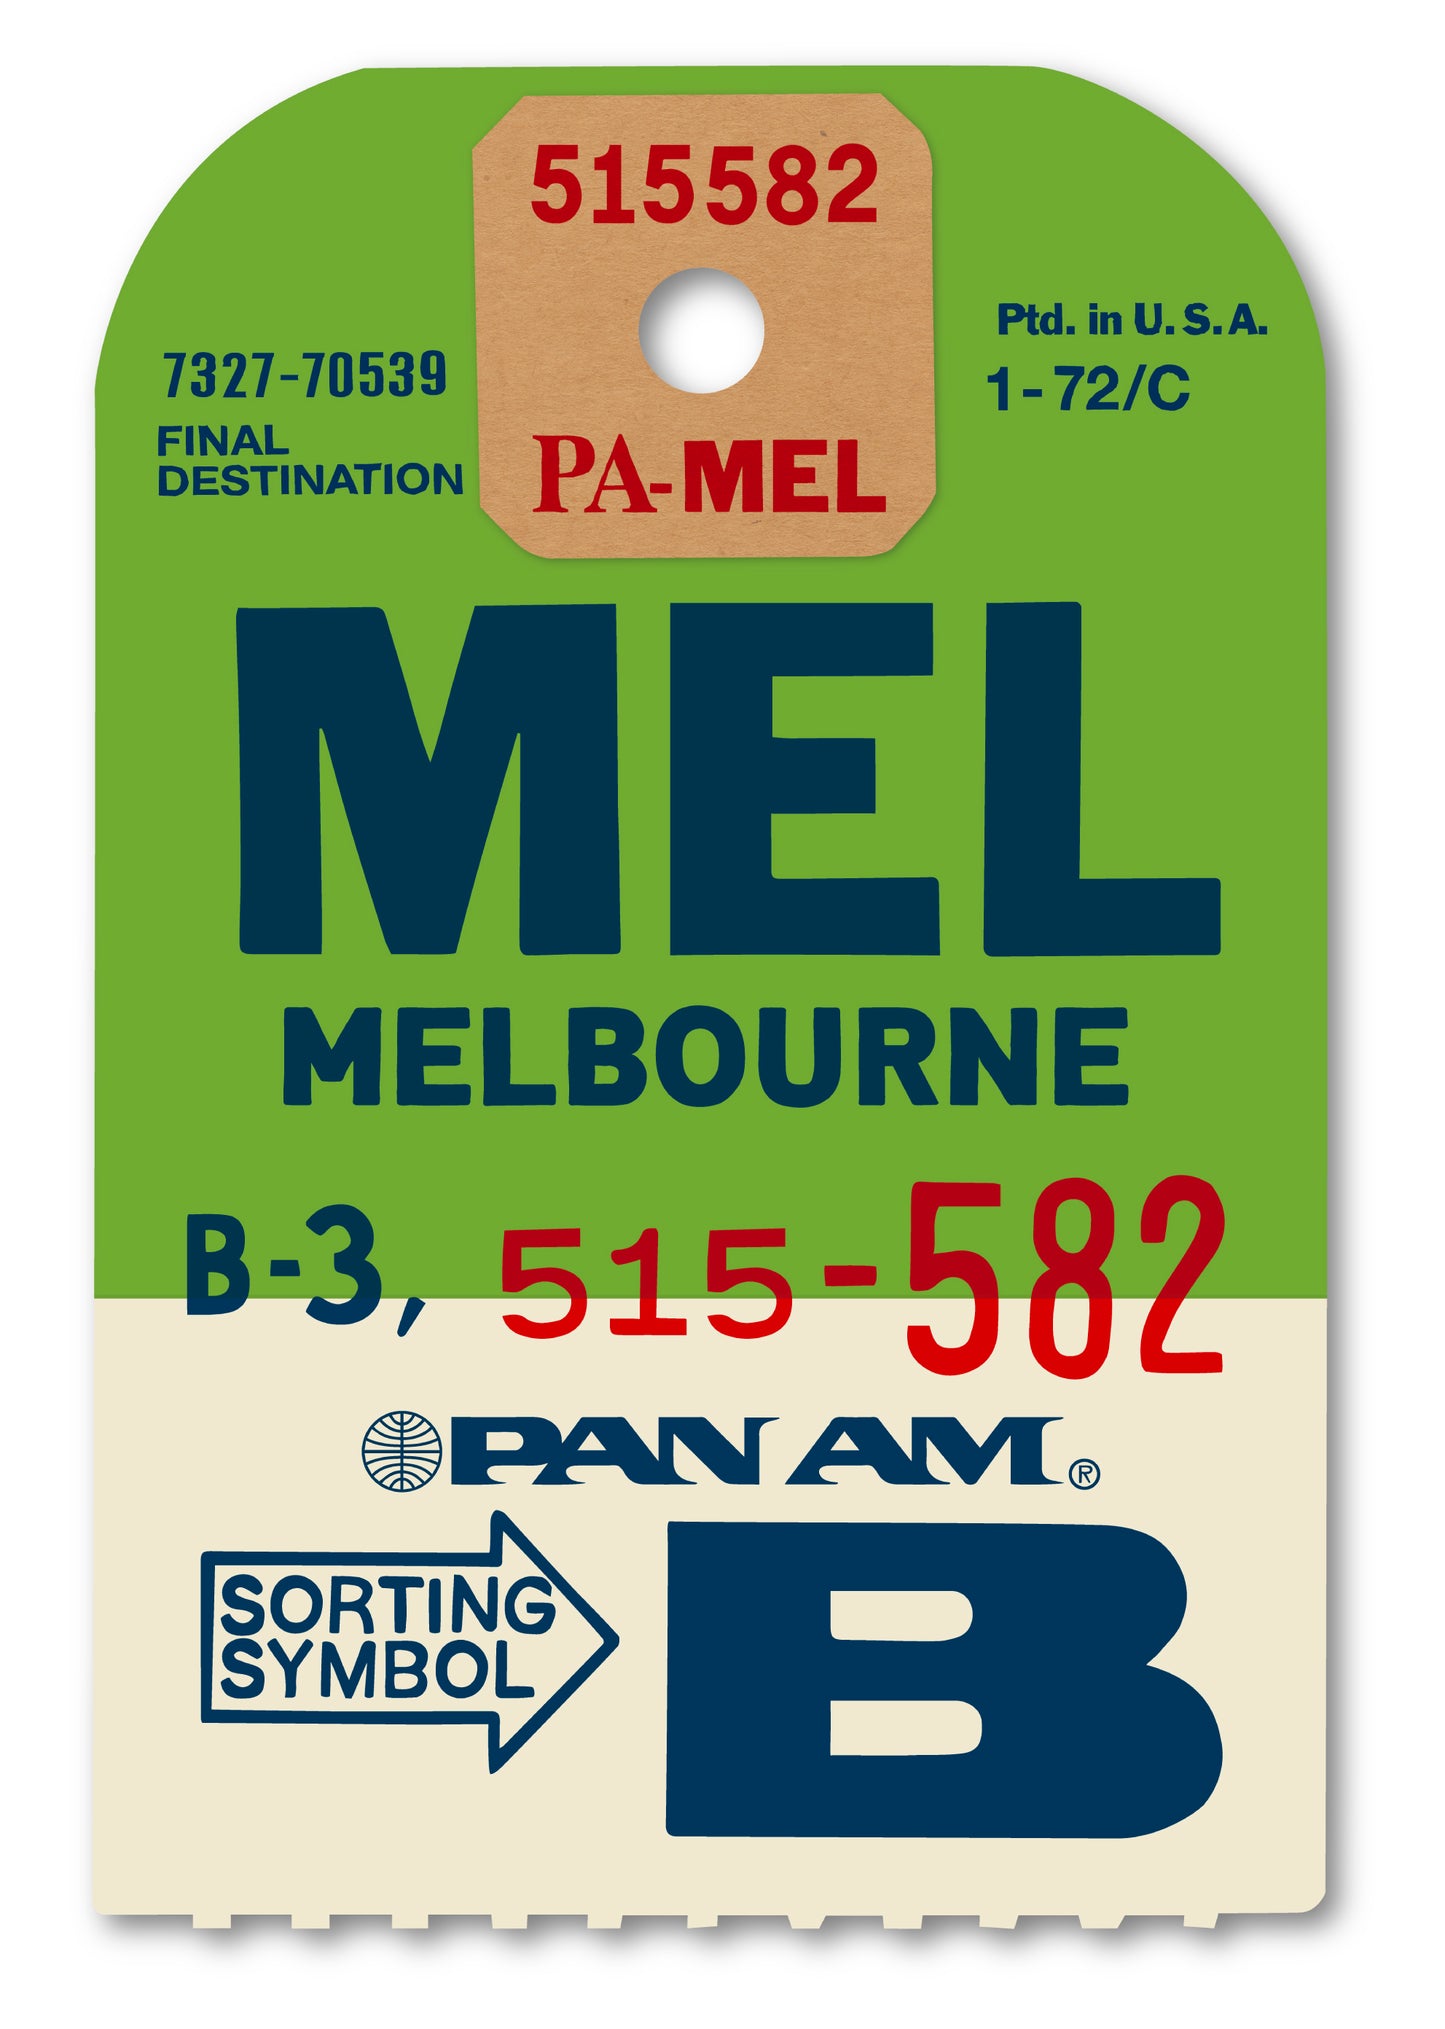 PAN AM ‘MELBOURNE’ LUGGAGE TAG